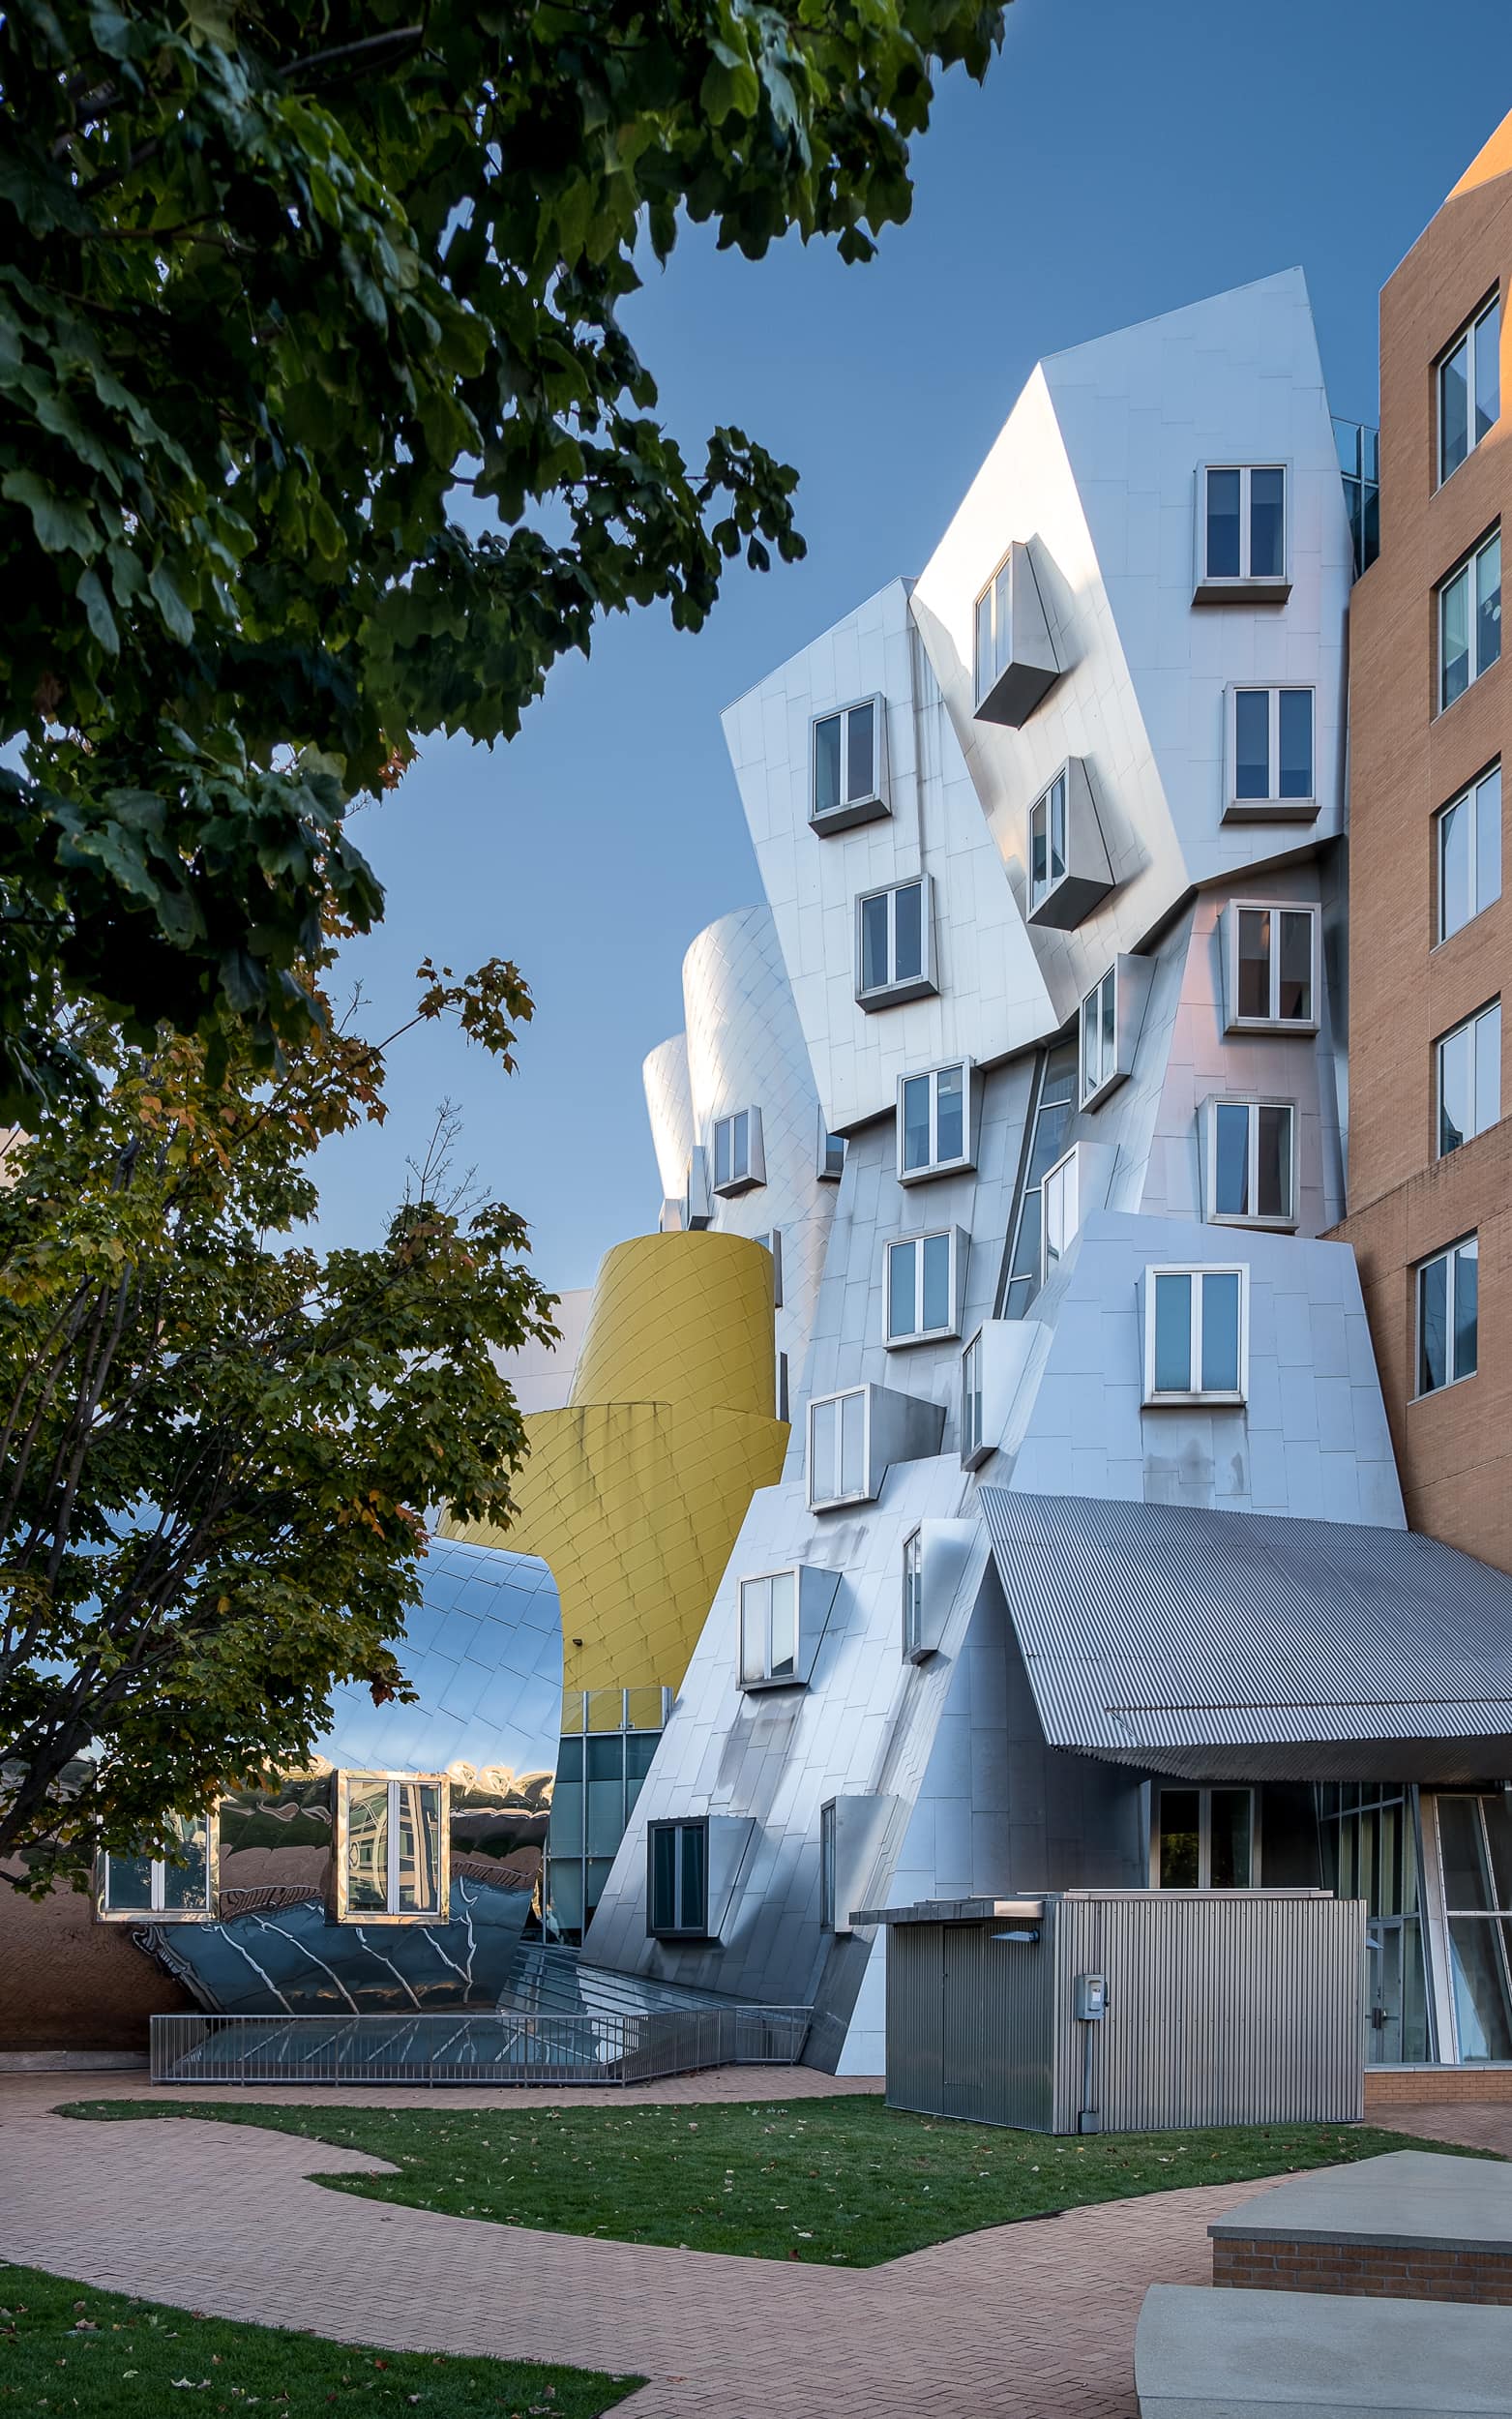 Architectural photography of the Ray and Maria Stata Center at the Massachusetts Institute of Technology (MIT) in Boston designed by Frank Gehry featuring a side angle capturing the rear of the building in brick and aluminum with a pop of yellow framed by a large tree on the left side of the frame